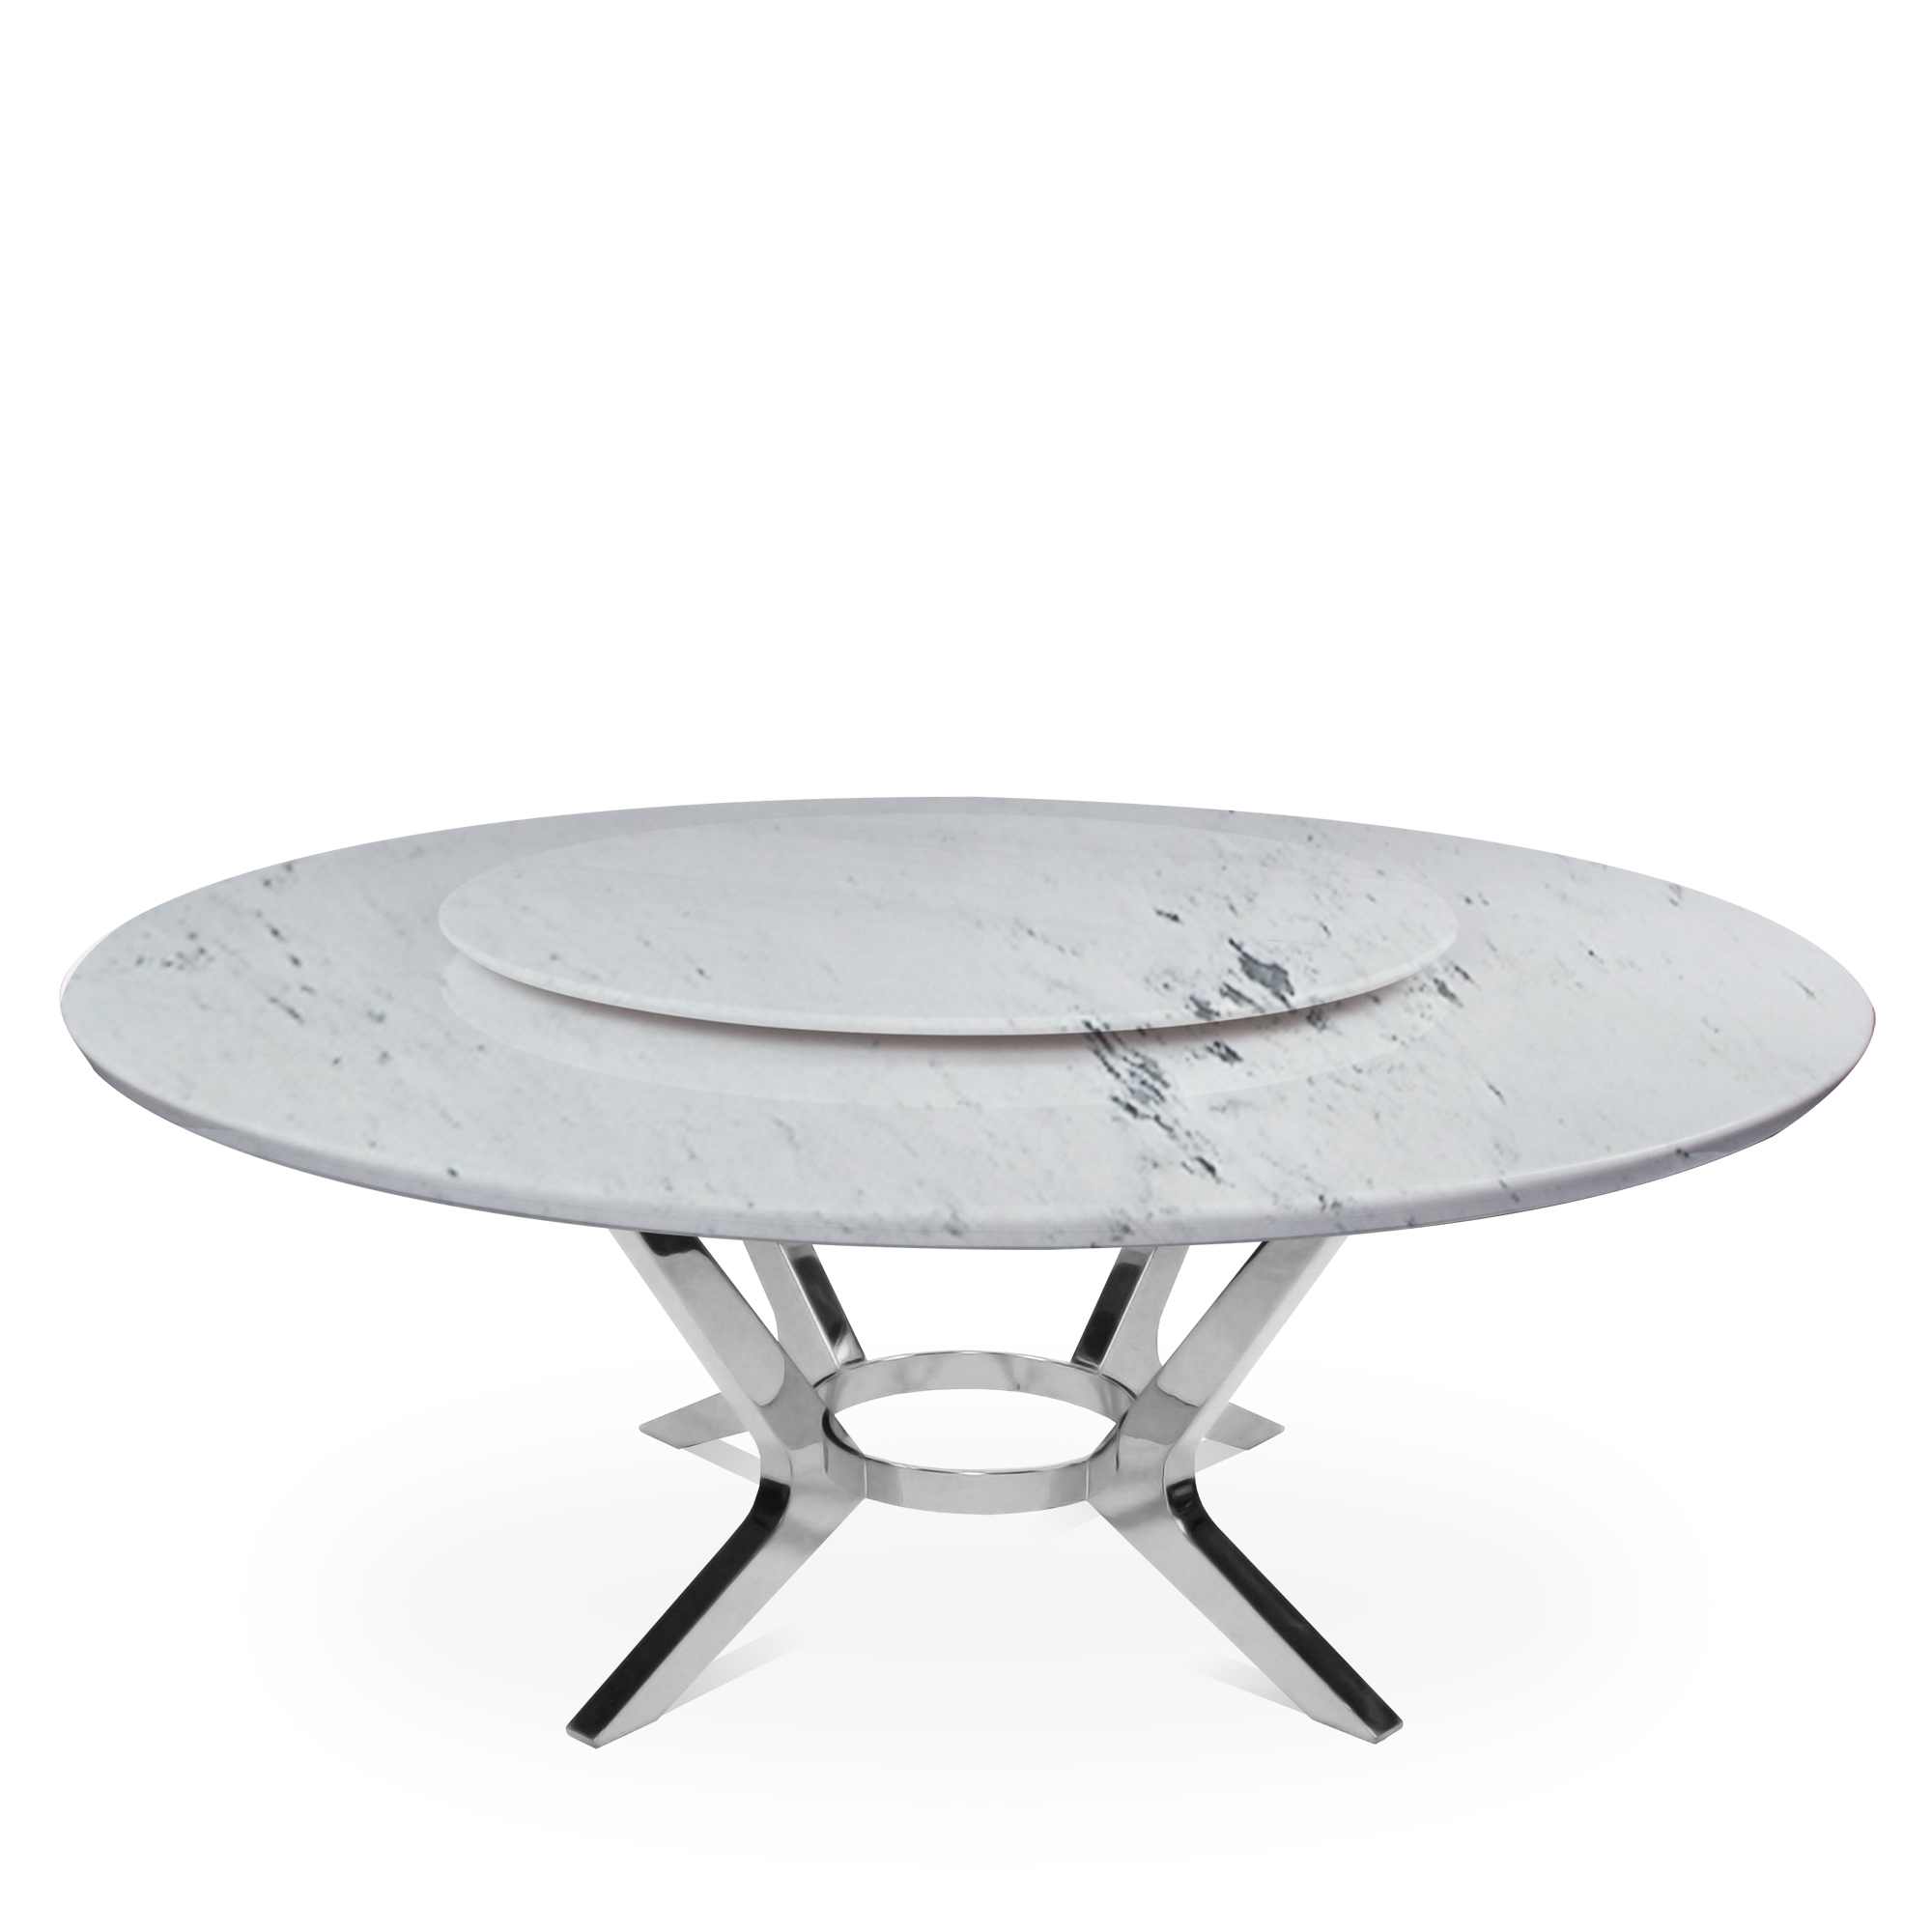 Stojic | Art Series | Decasa Marble Marble Dining Table